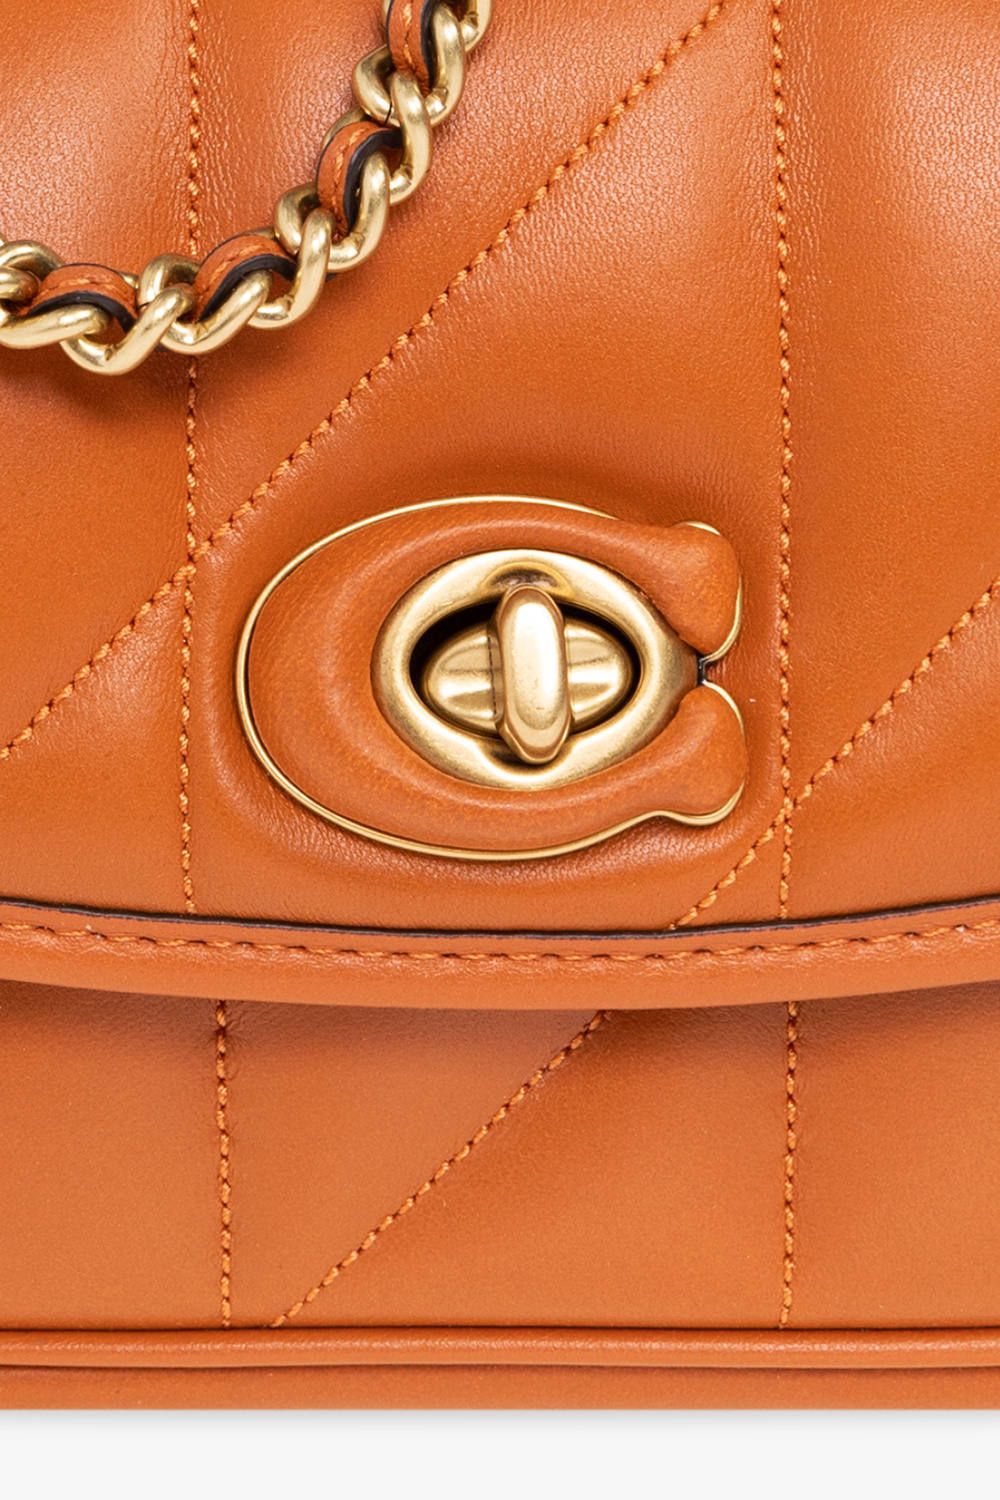 COACH Courier Textured Leather Crossbody Bag in Orange